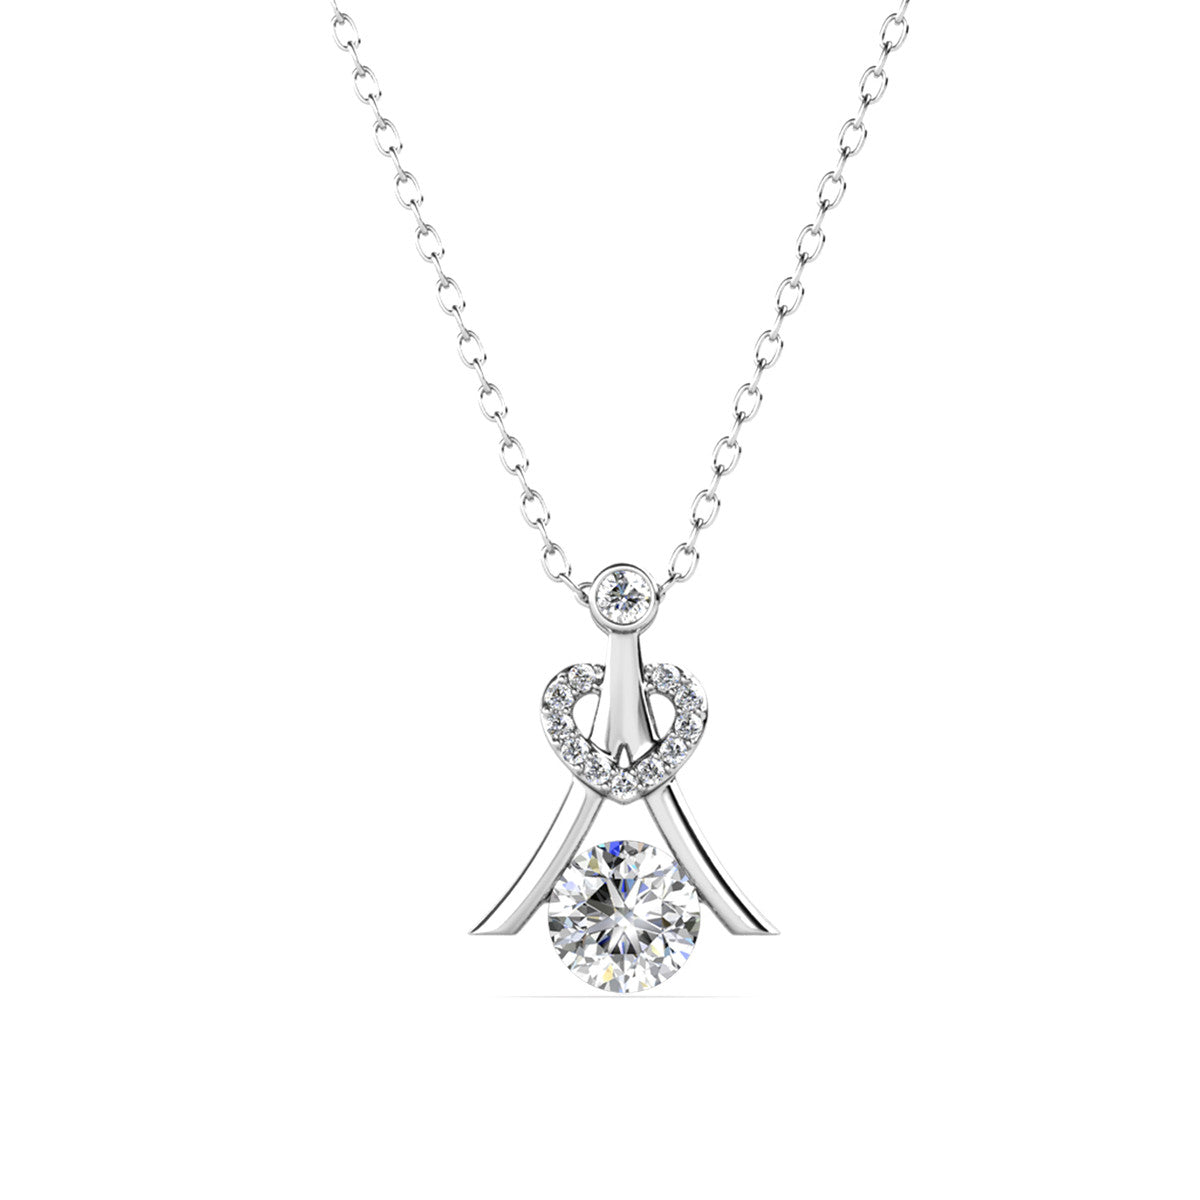 Serenity April Birthstone Diamond Necklace, 18k White Gold Plated Silver Necklace with Round Cut Crystals